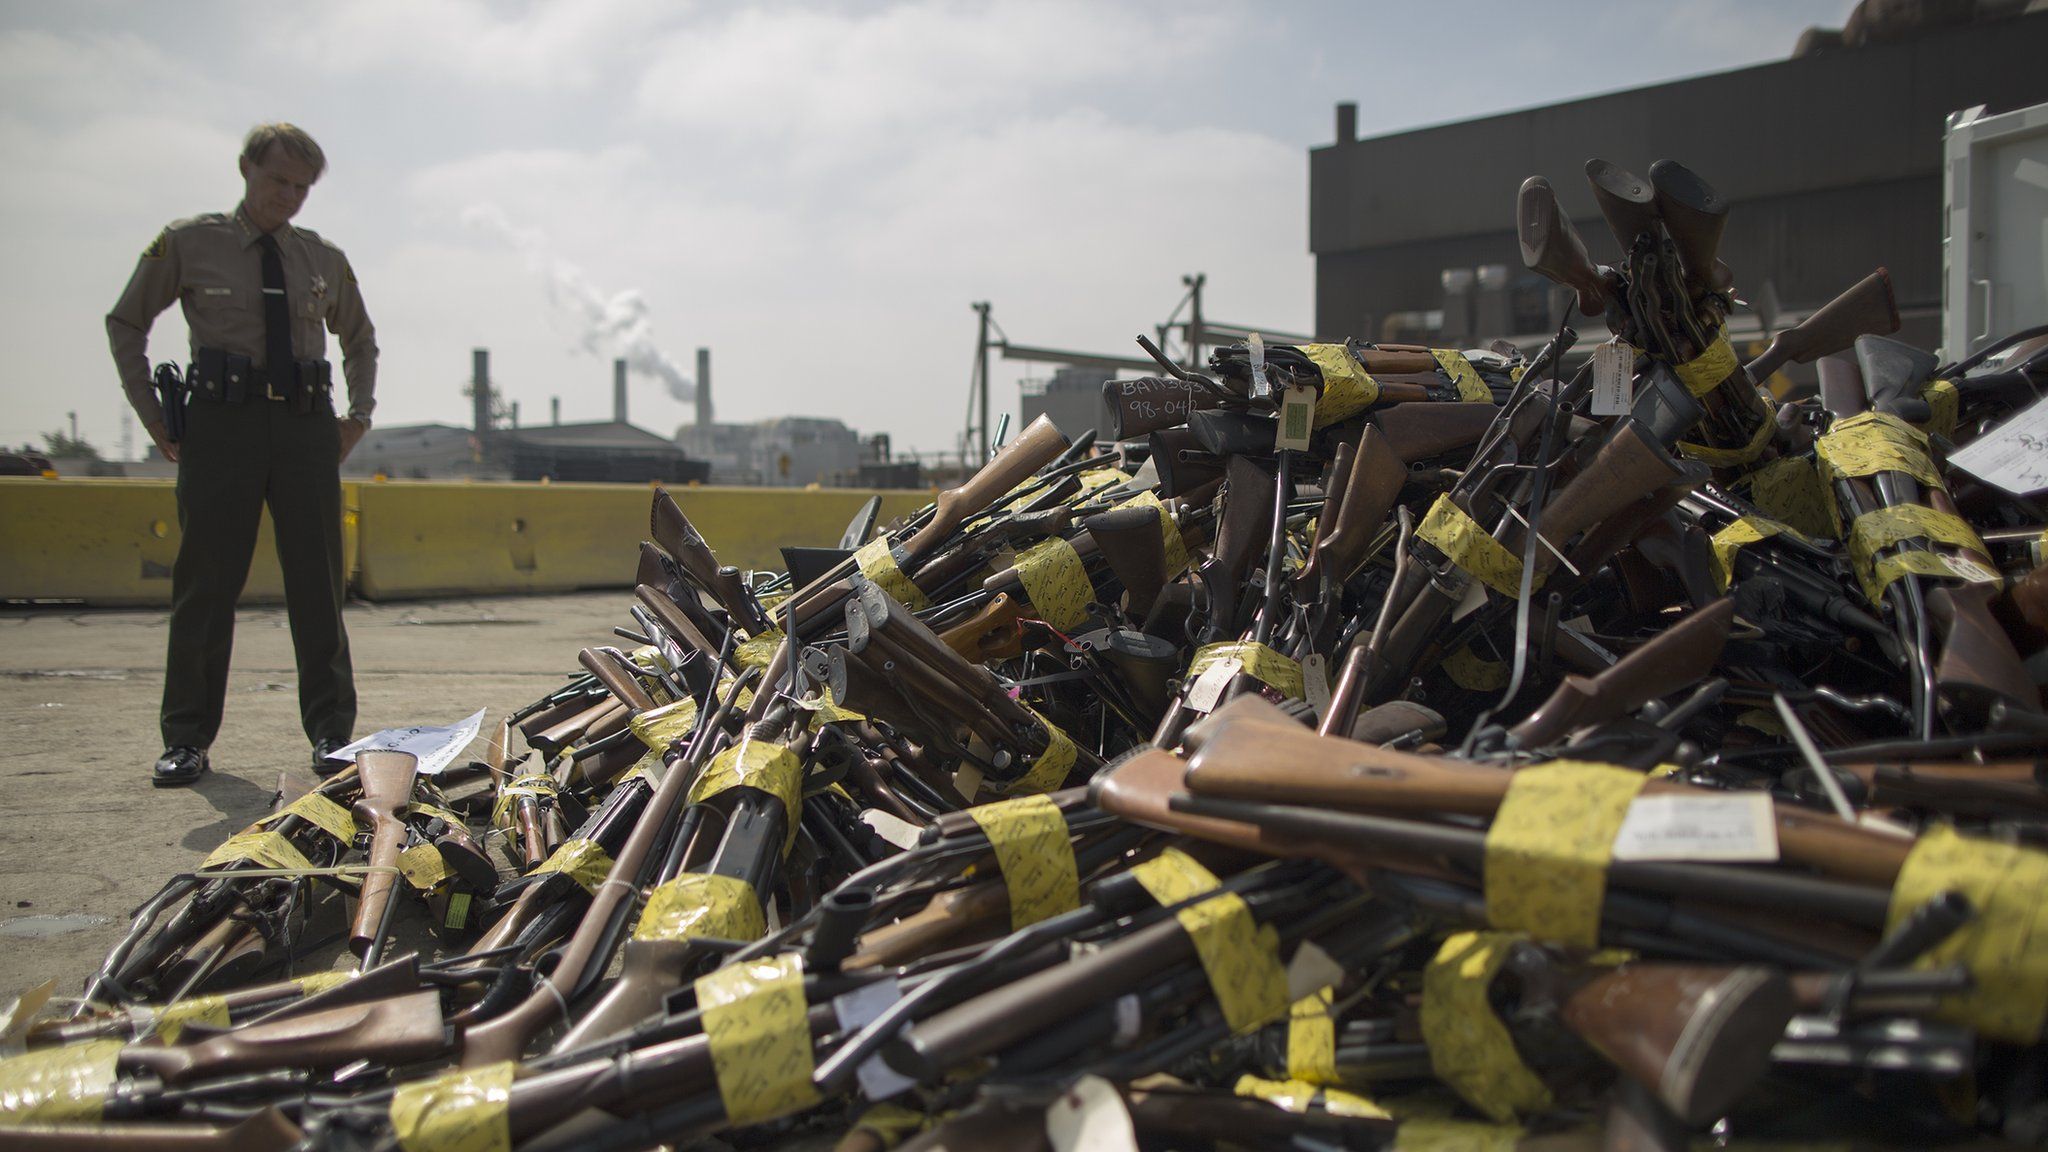 A Los Angeles County Sheriffs deputy looks at a pile of guns on July 6, 2015 in Rancho Cucamonga, California.